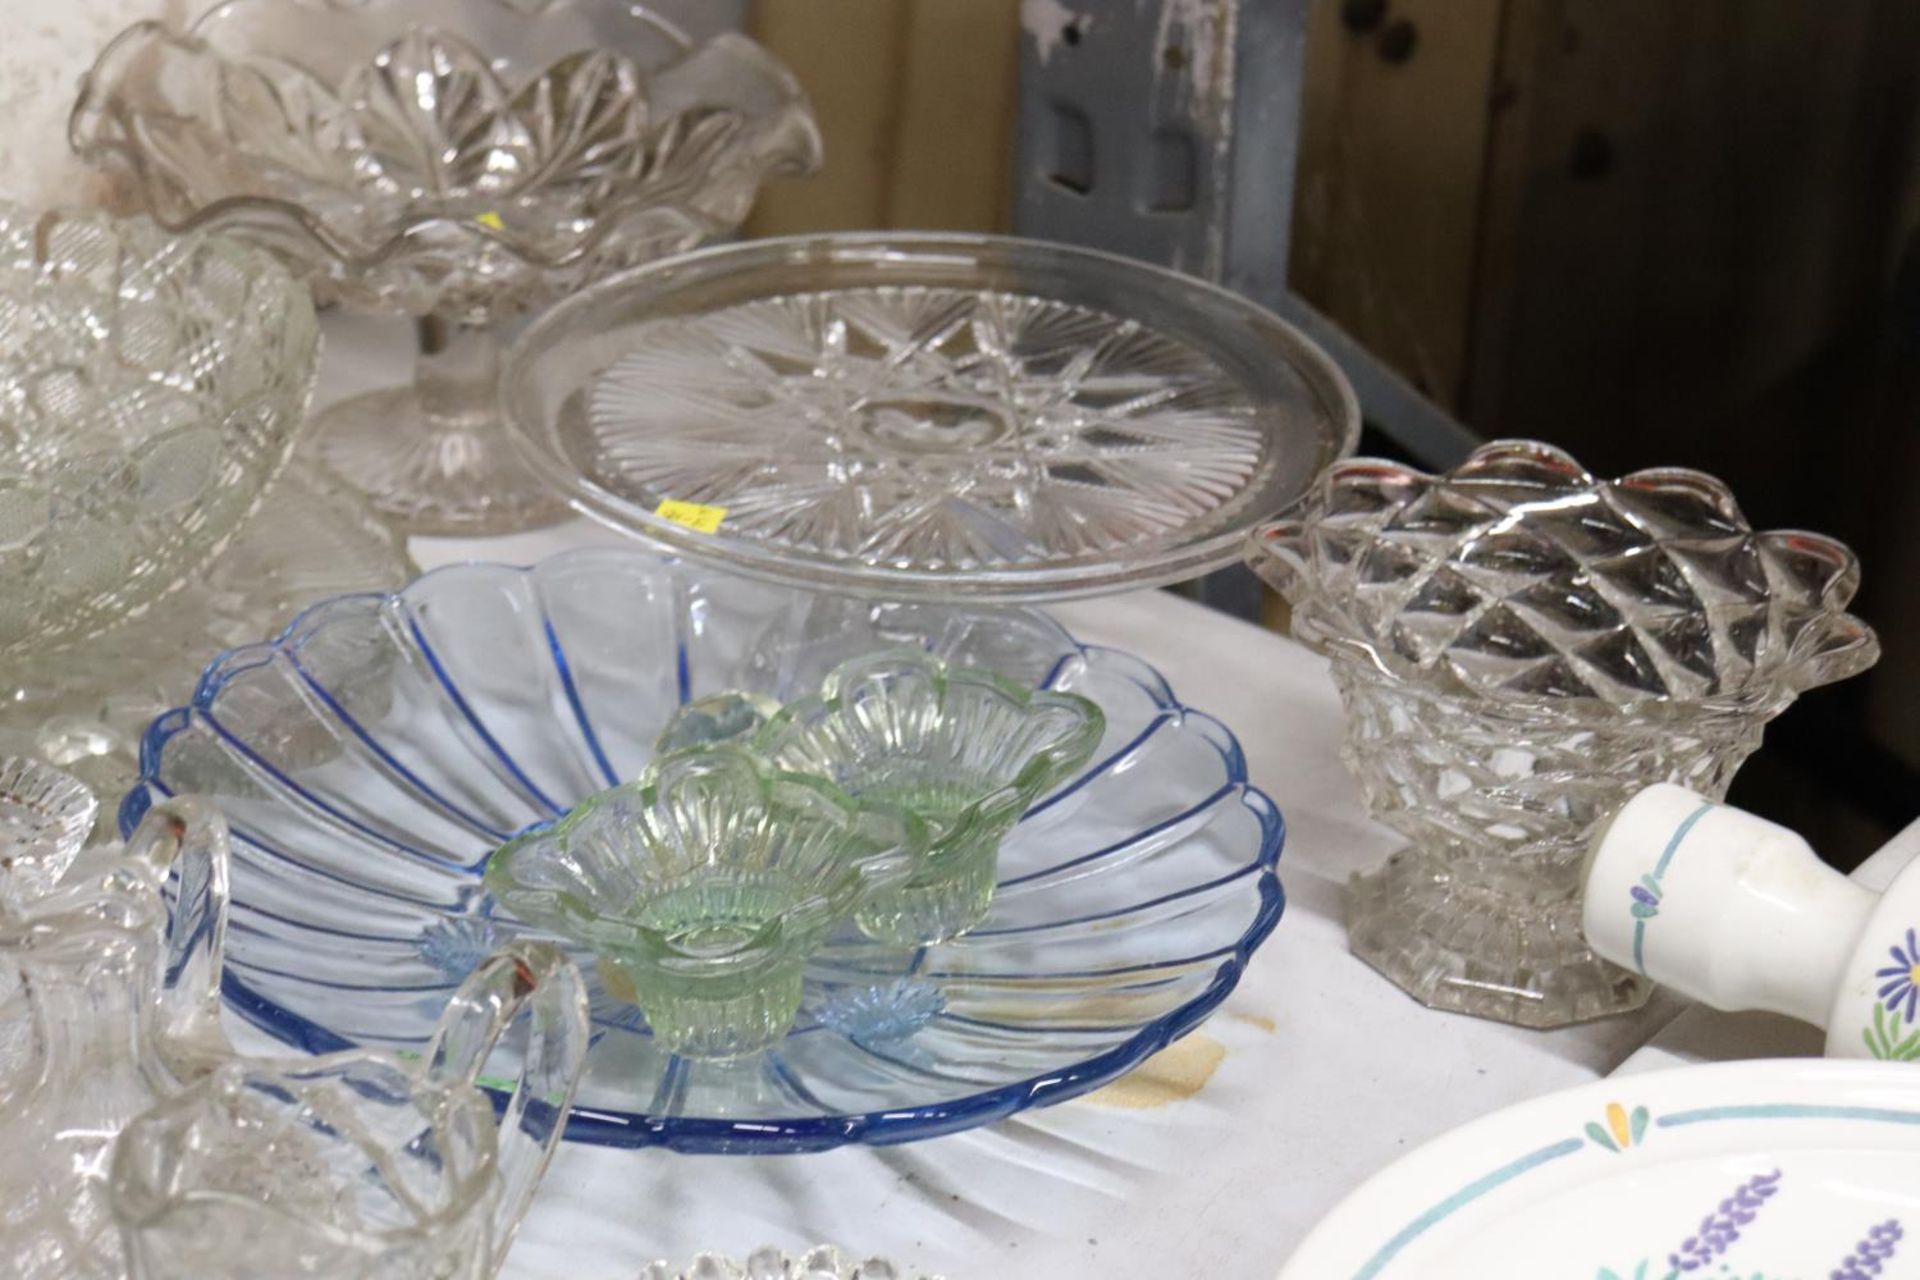 A LARGE QUANTITY OF GLASSWARE TO INCLUDE BOWLS, CAKE STANDS, JUGS, ETC - Image 5 of 6